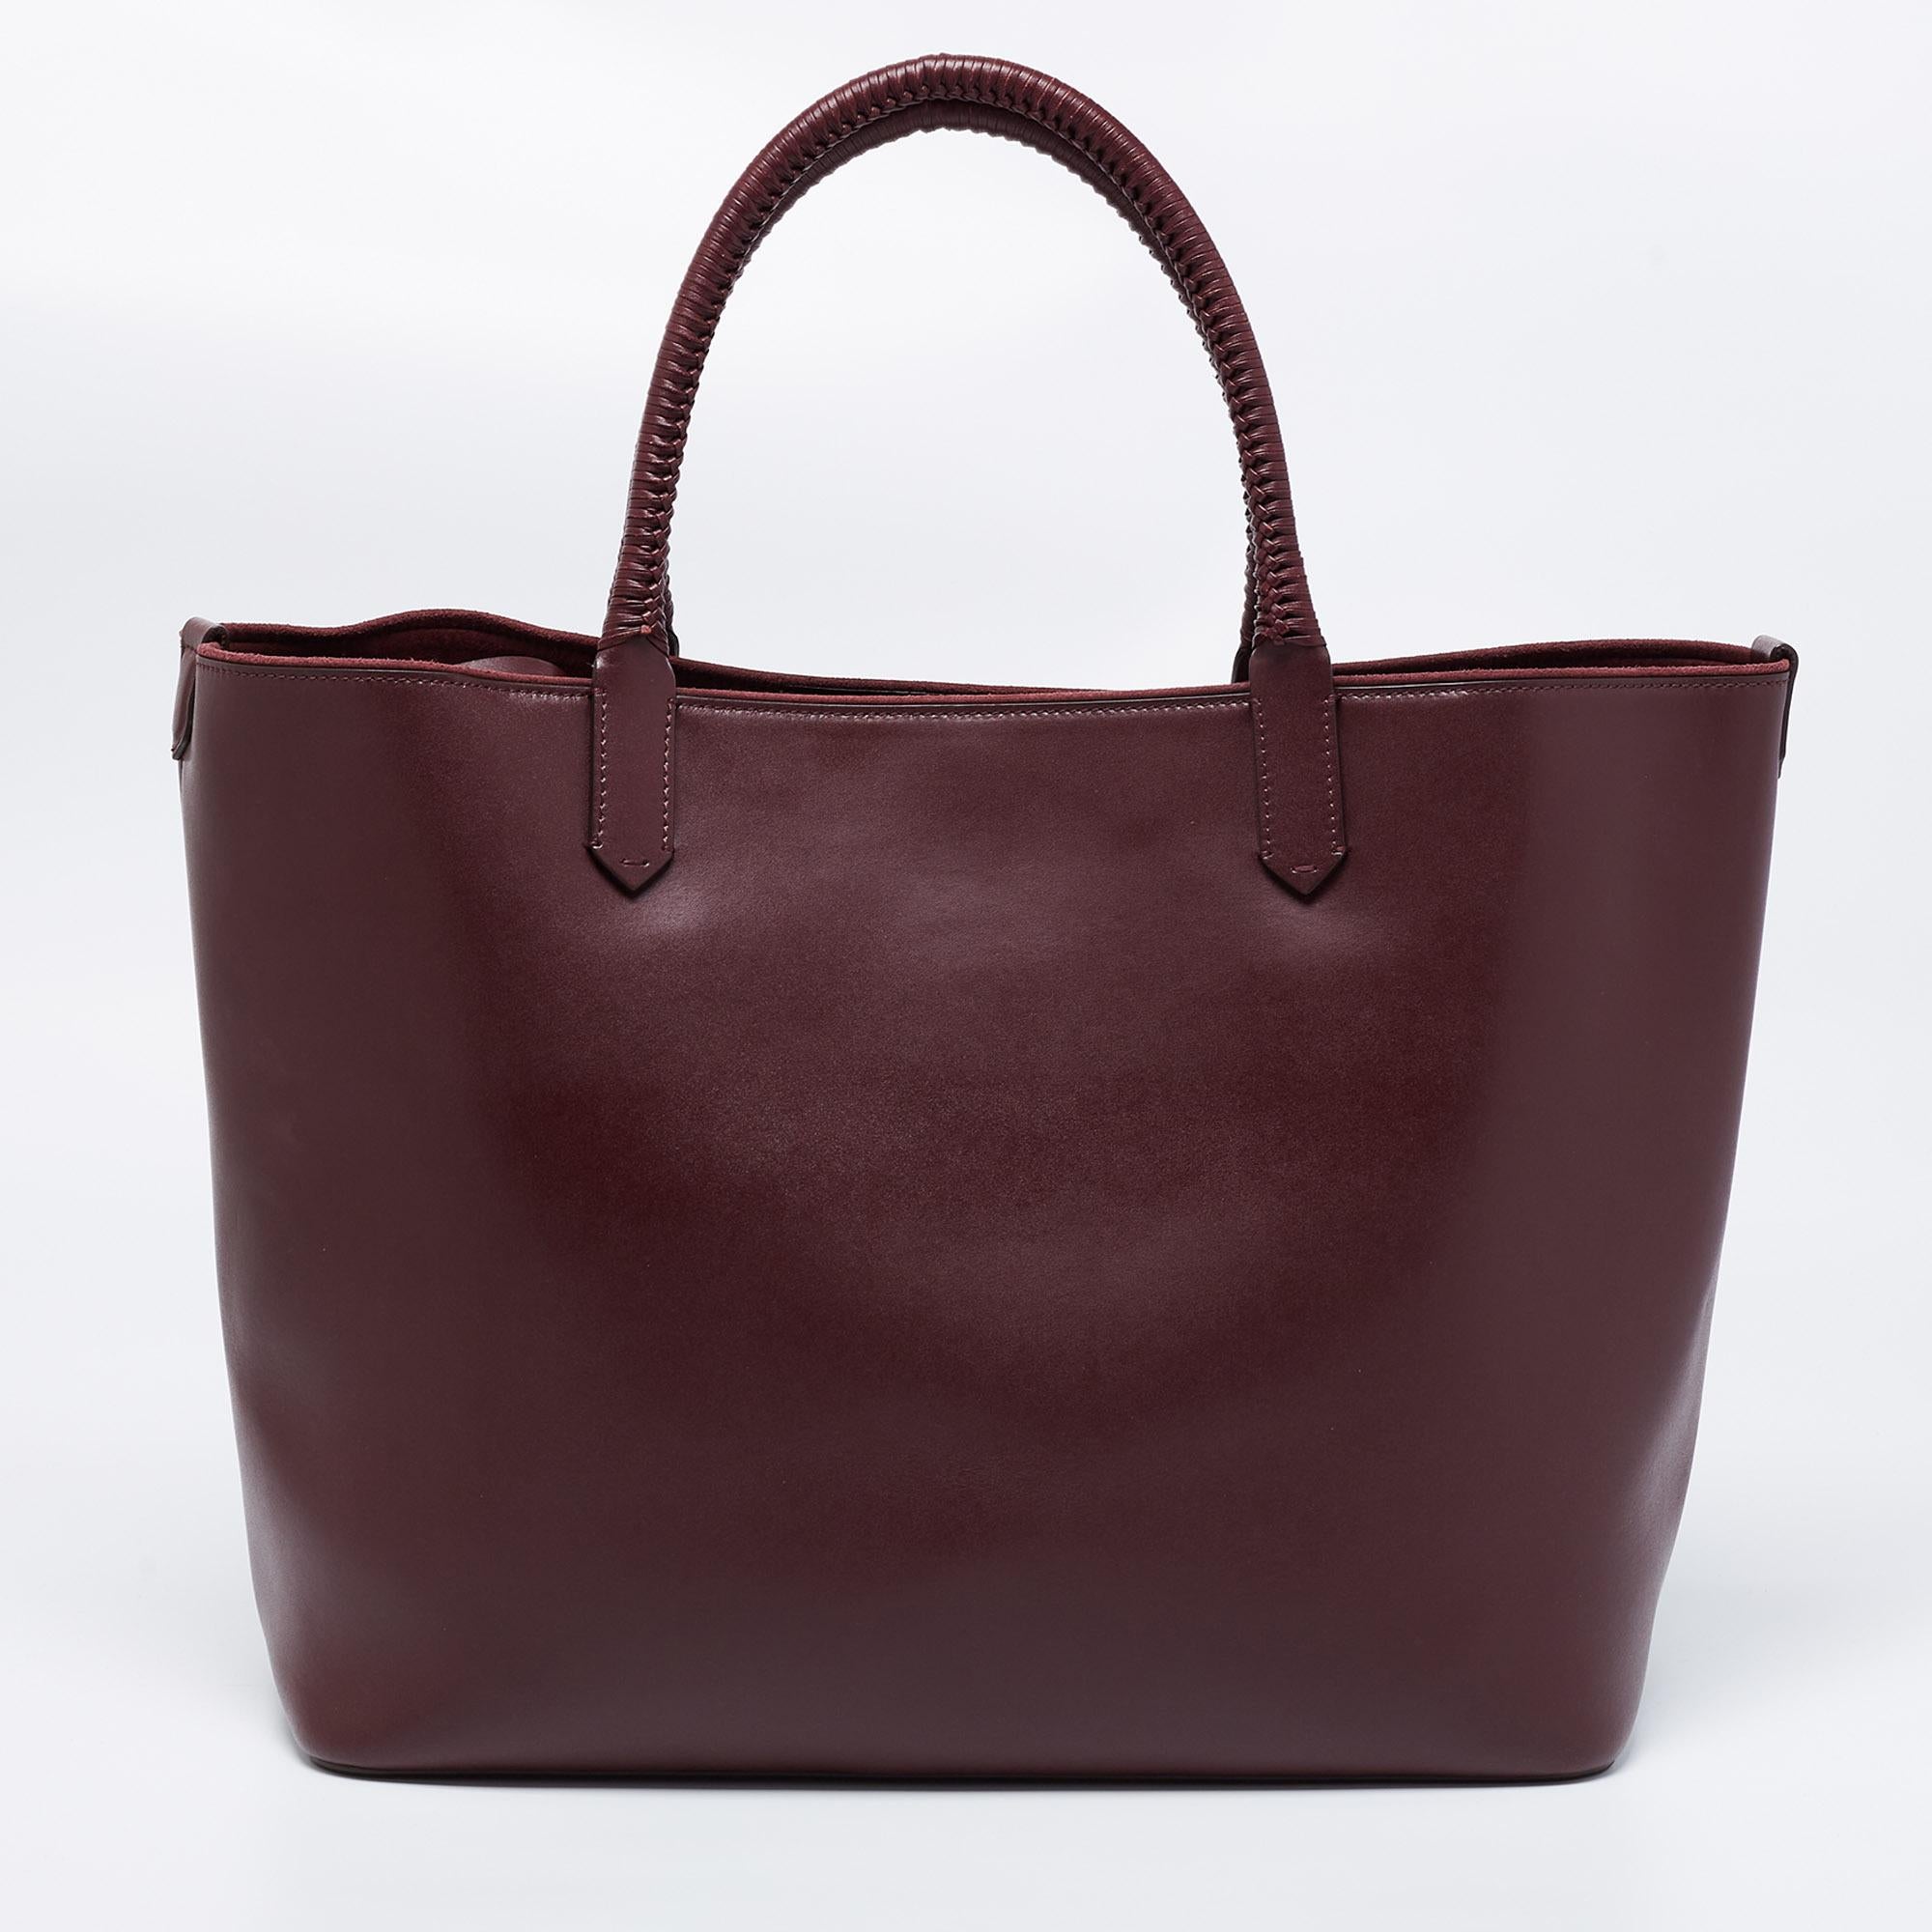 Givenchy's Antigona Belt tote has a modern silhouette and a functional quality. Constructed using leather, the bag has a front logo and a suede-lined interior. The whipstitch handles on the top of the bag act as the design's highlight.

Includes: